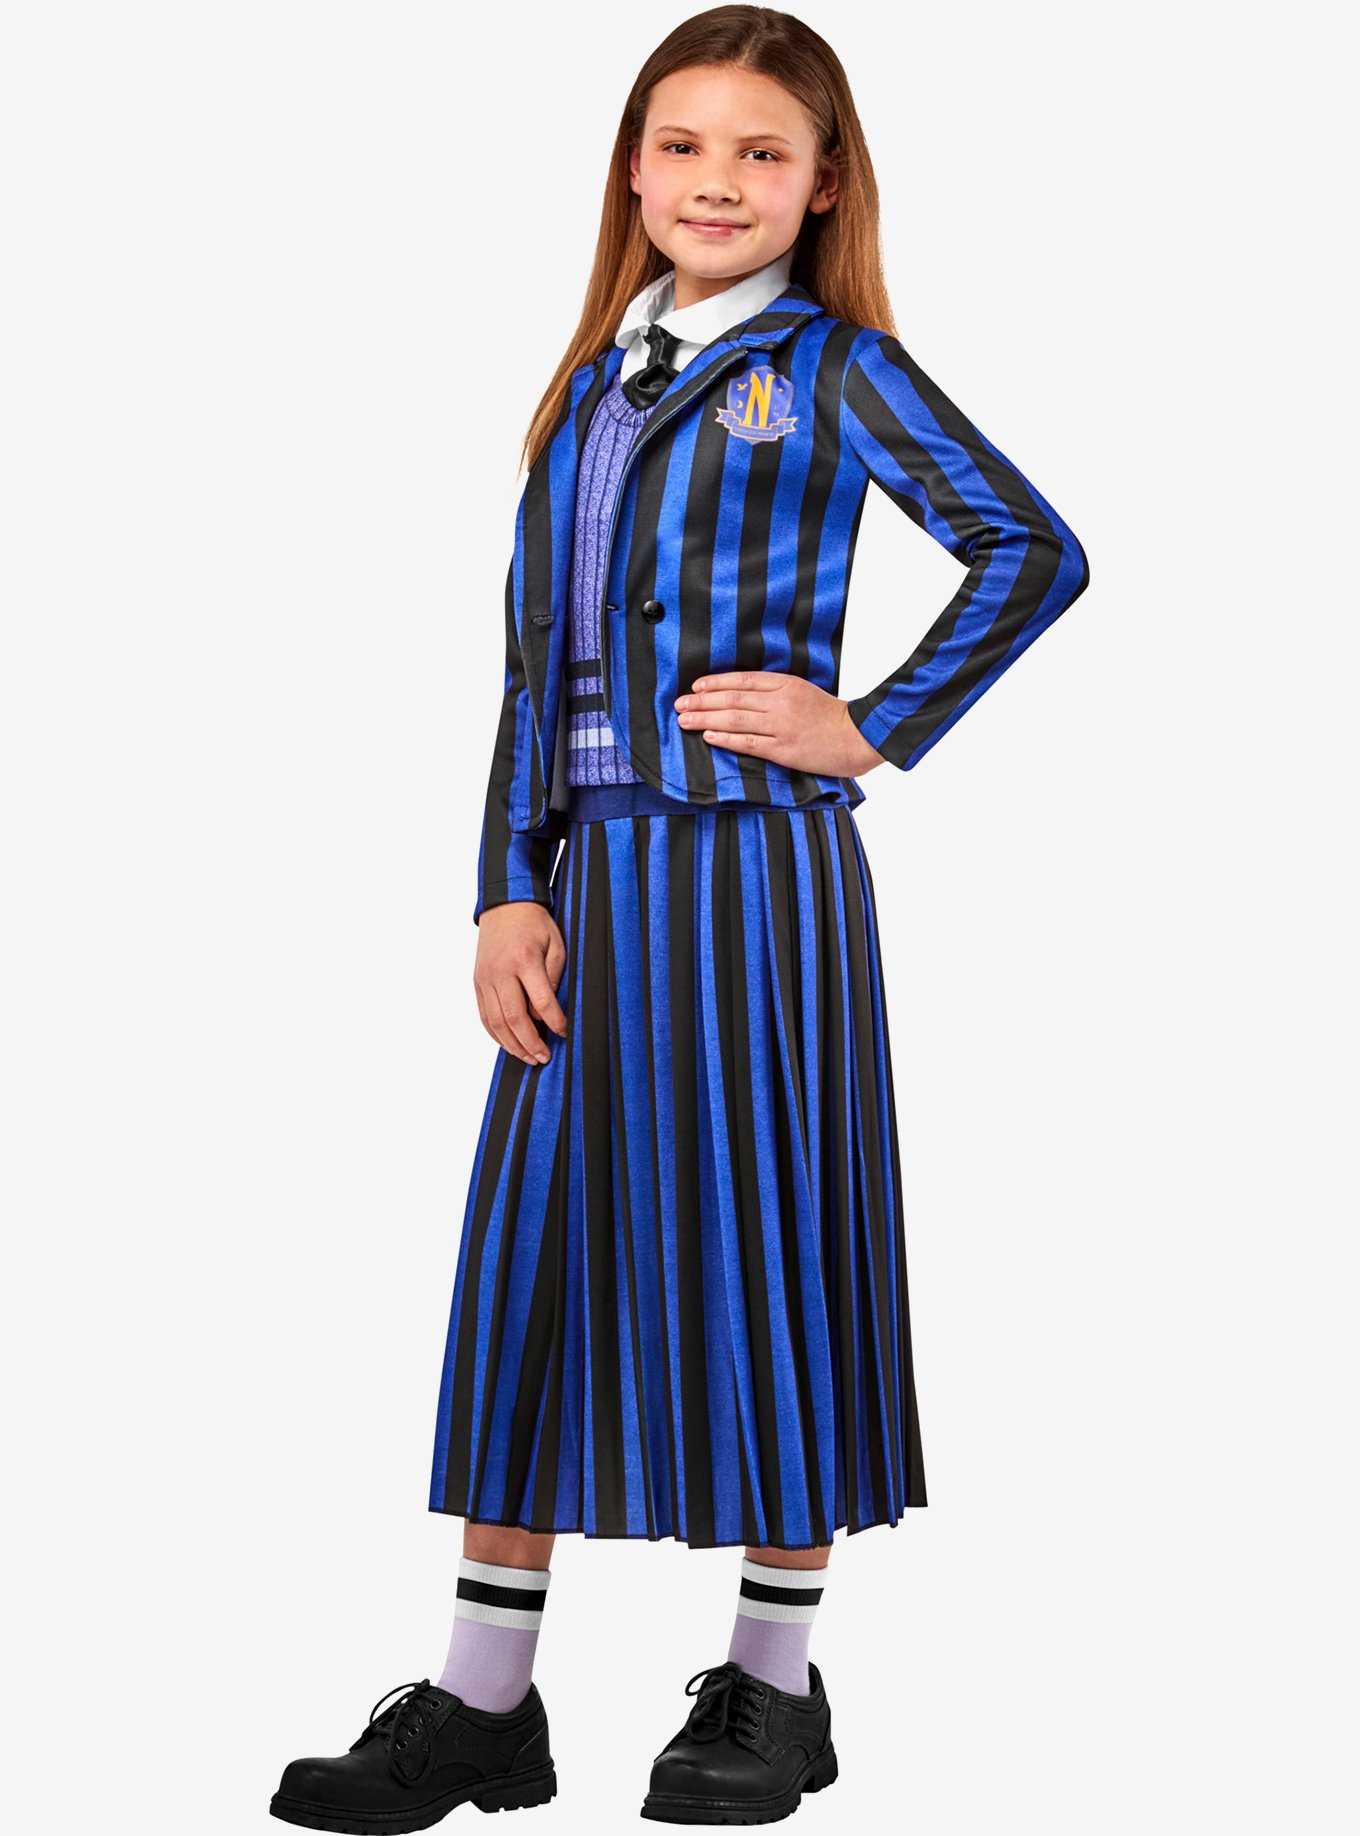 Wednesday Nevermore Academy Uniform Youth Costume, , hi-res